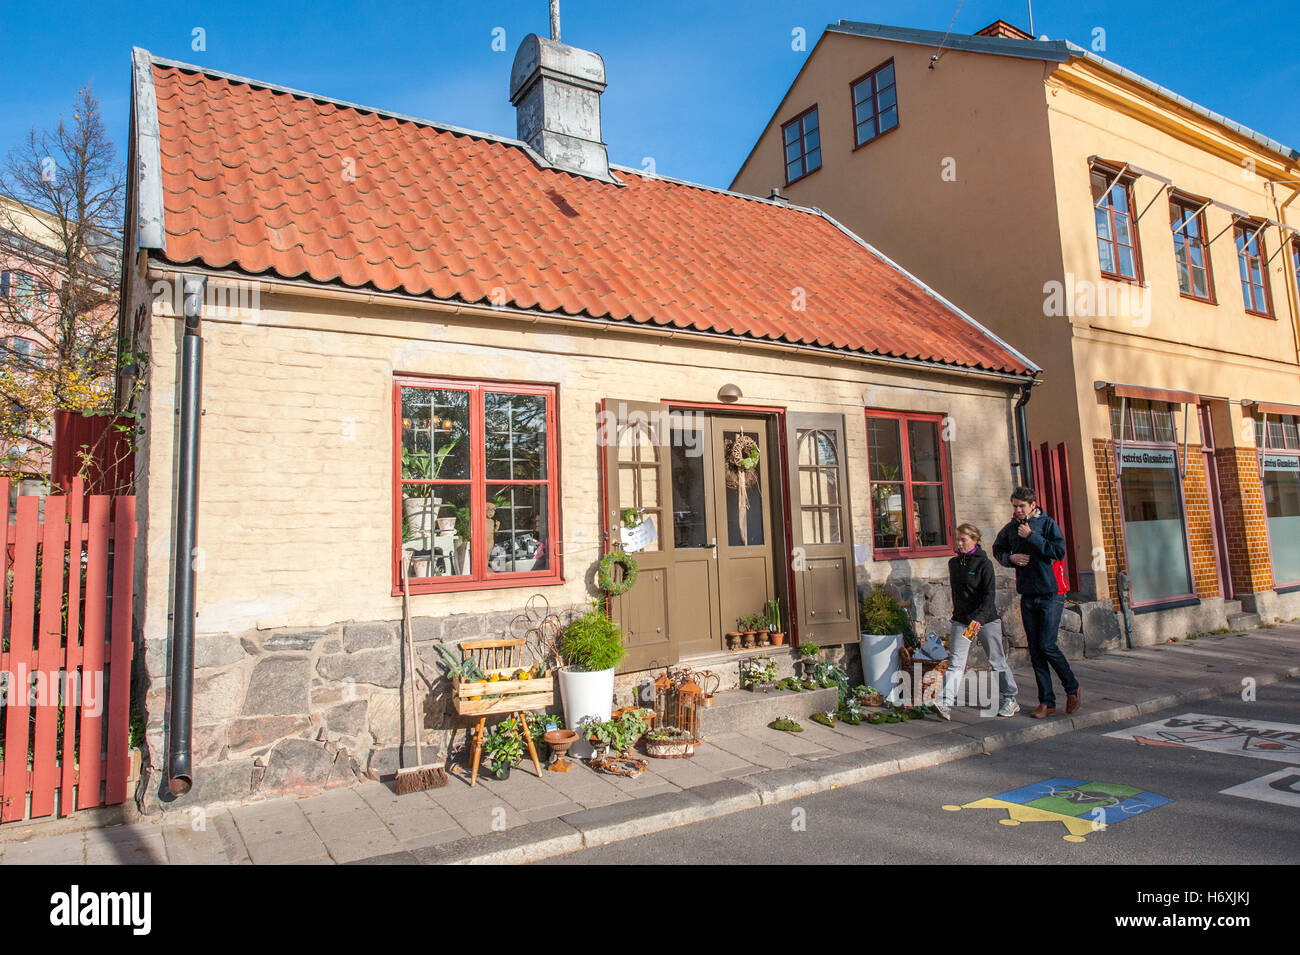 'The last drink' an old pharmacy dating back to 1760. Norrkoping is a historic industrial town in Sweden. Stock Photo